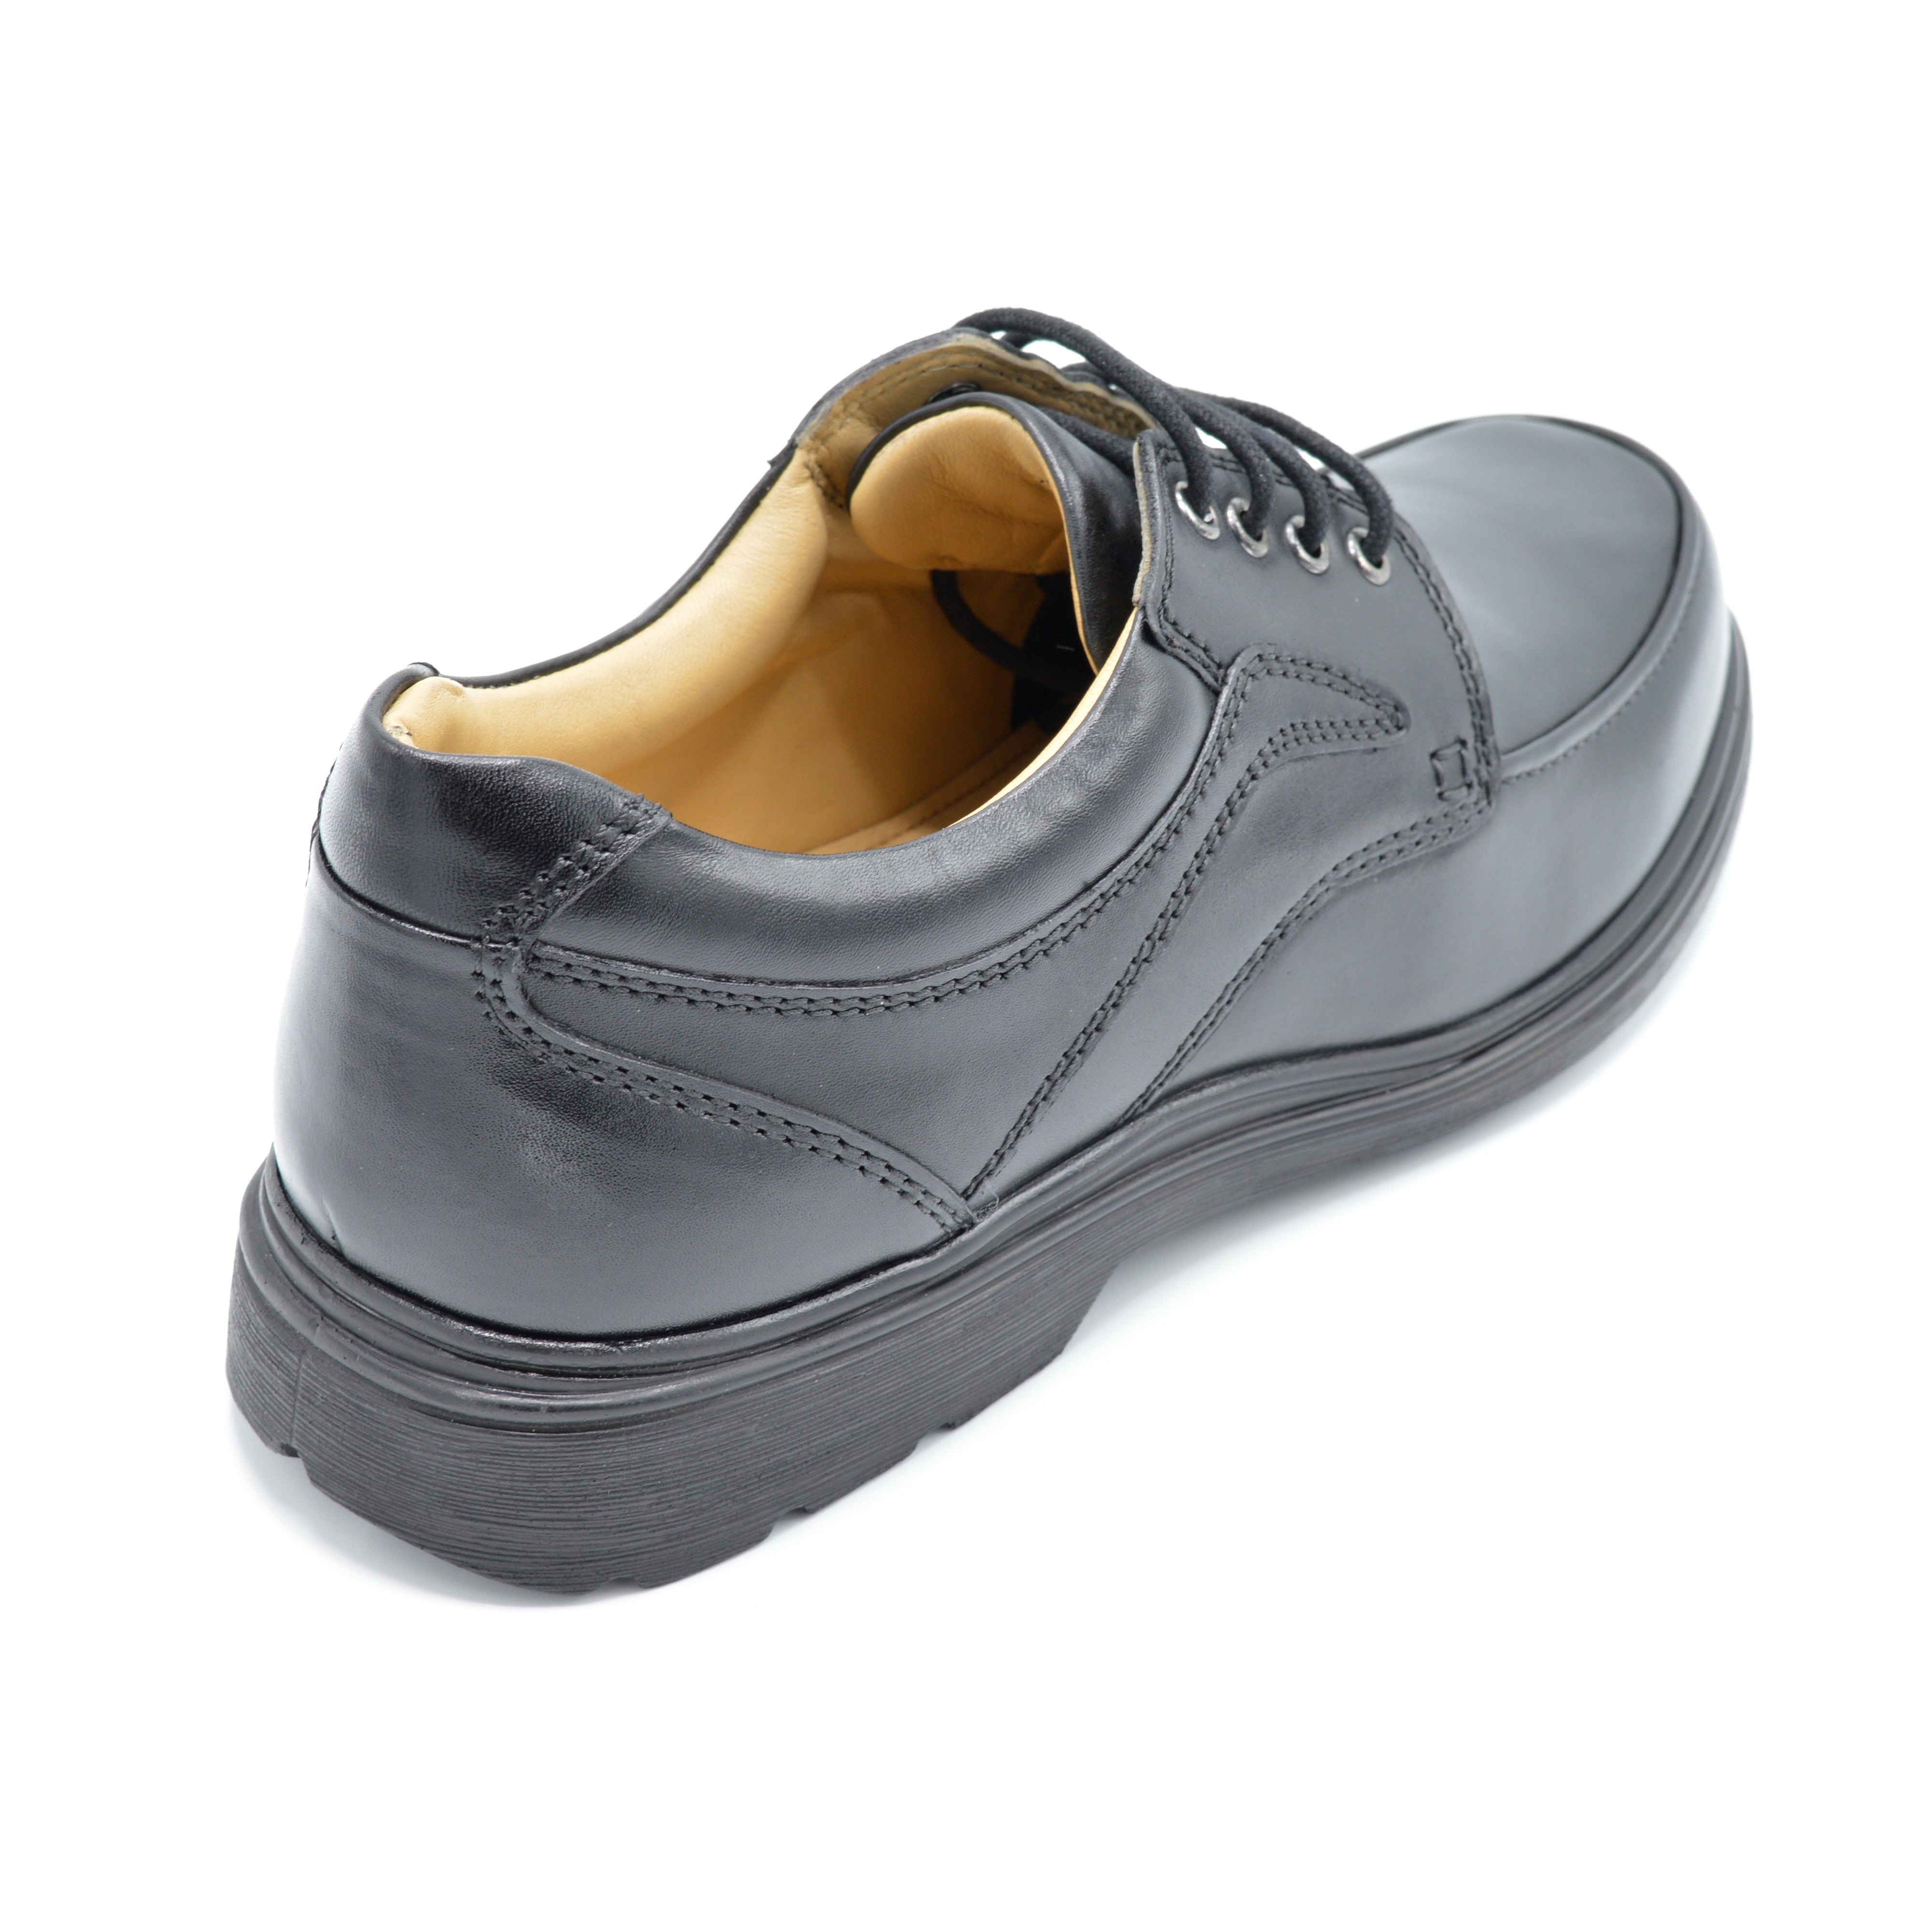 Comfortable Soft Leather Uppers For Bunions 